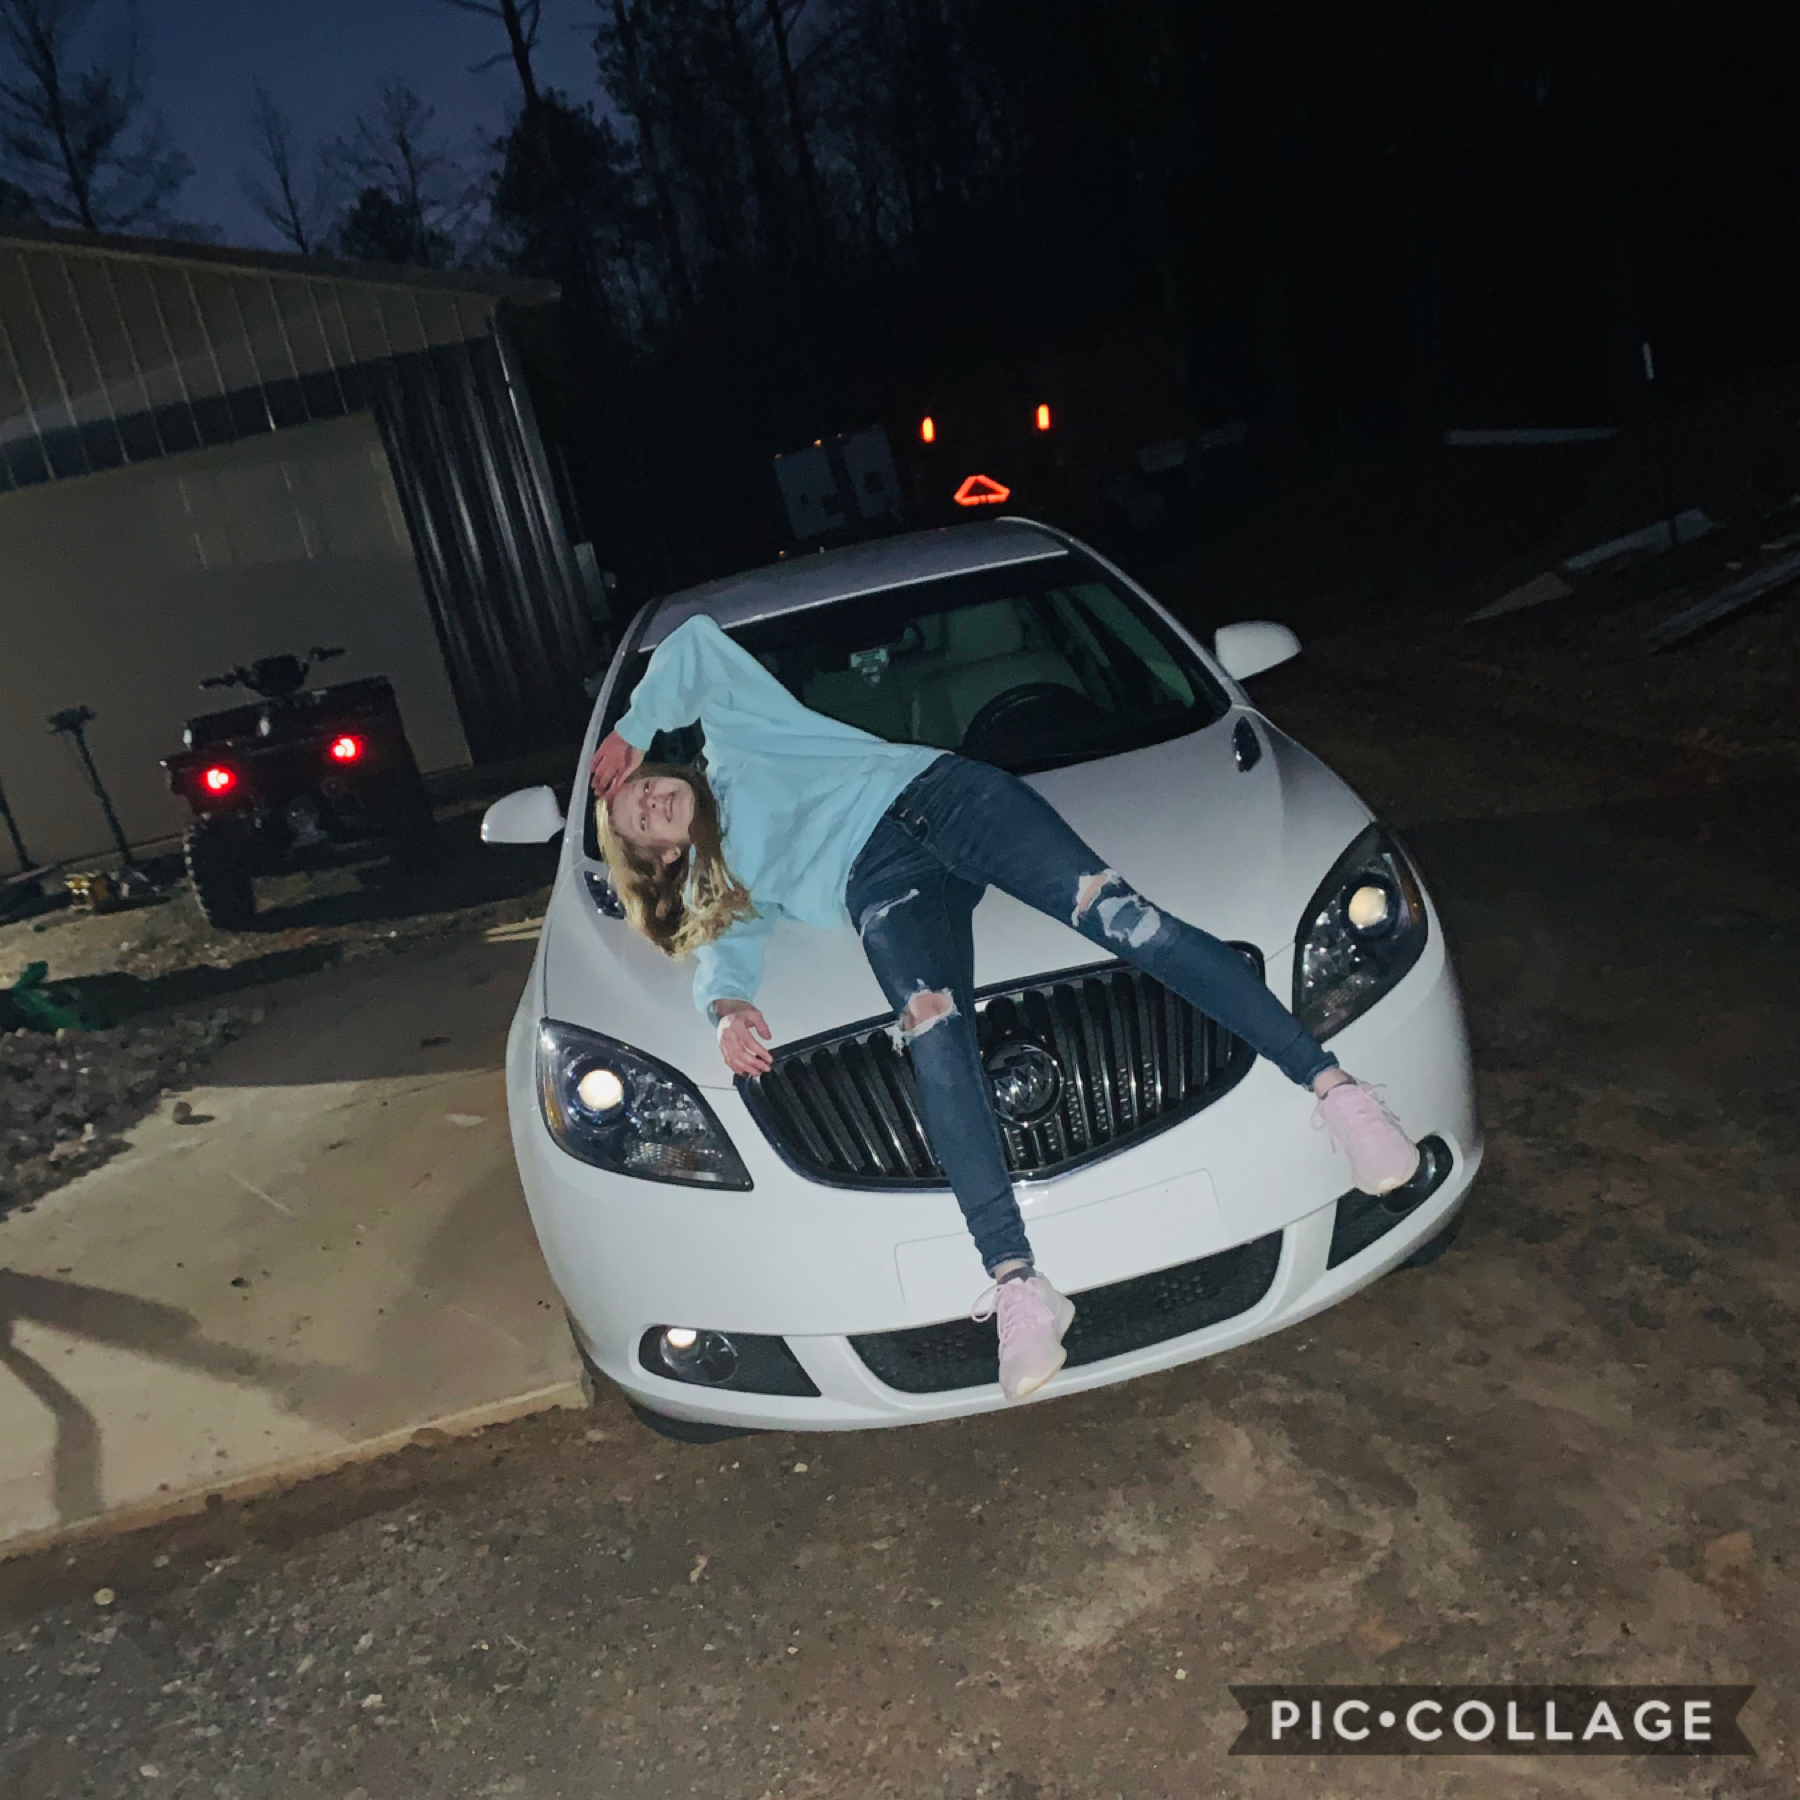 Uh here’s me laying on my car?😂 when I sat on the hood it kinda popped and I thought I dented it ksjsksk